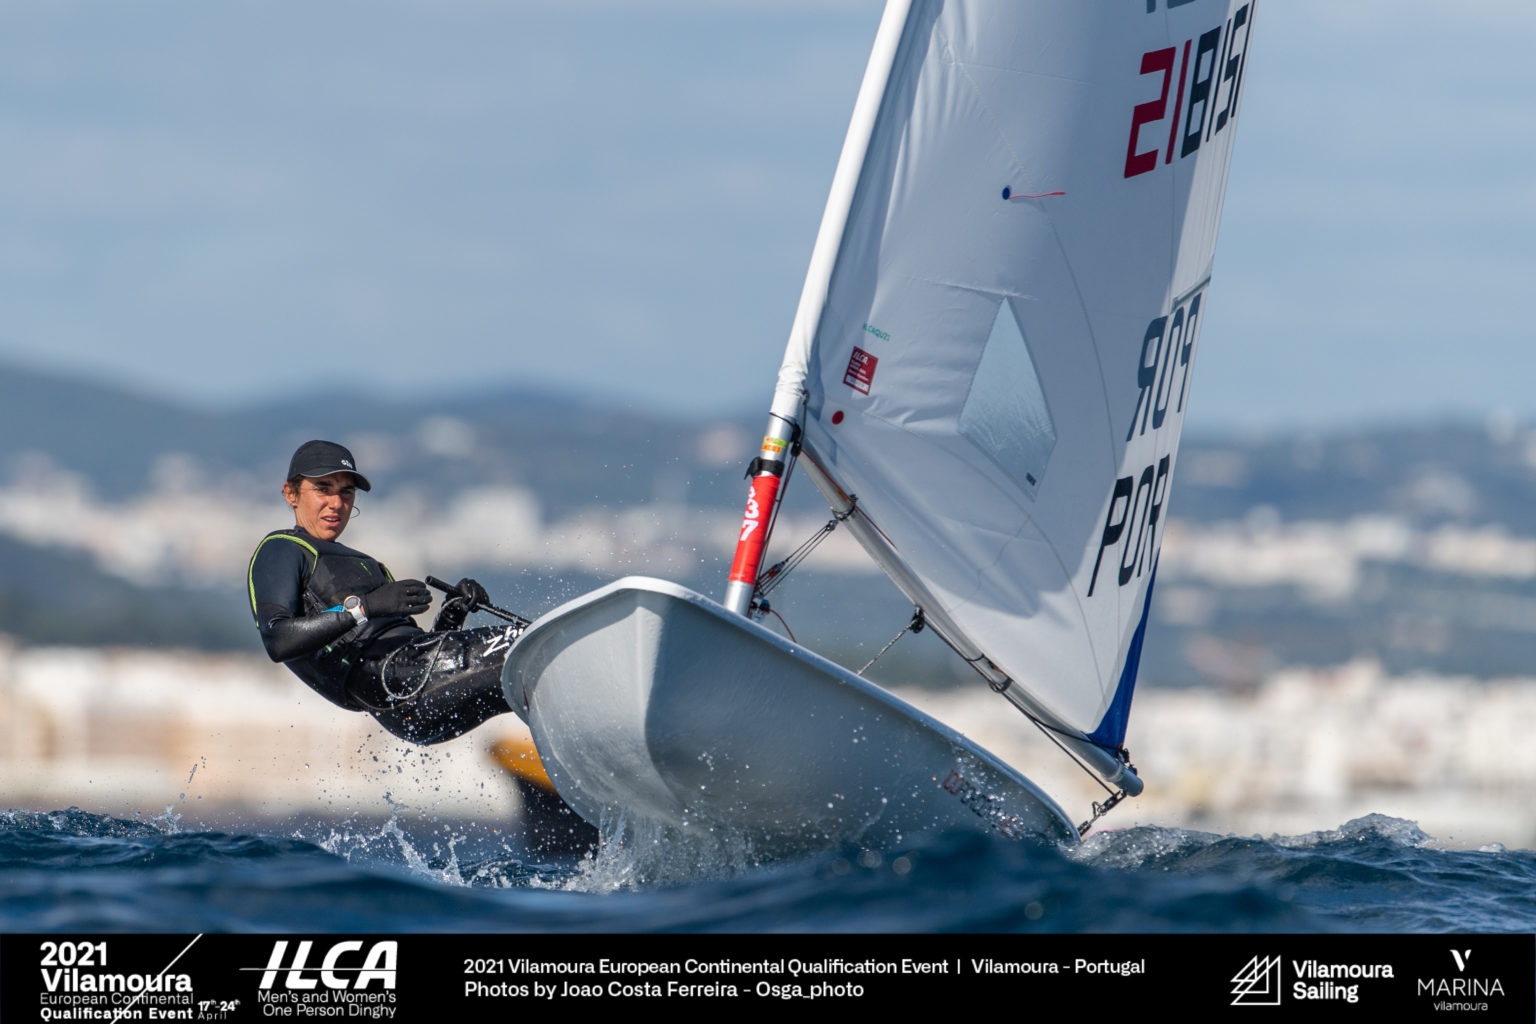  ILCA 6 + 7  European Olympic Qualifier Vilamoura POR  Day 3  Paige Railey (USA) climbed to 7th, Charlie Buckingham (USA) slipped to 16th